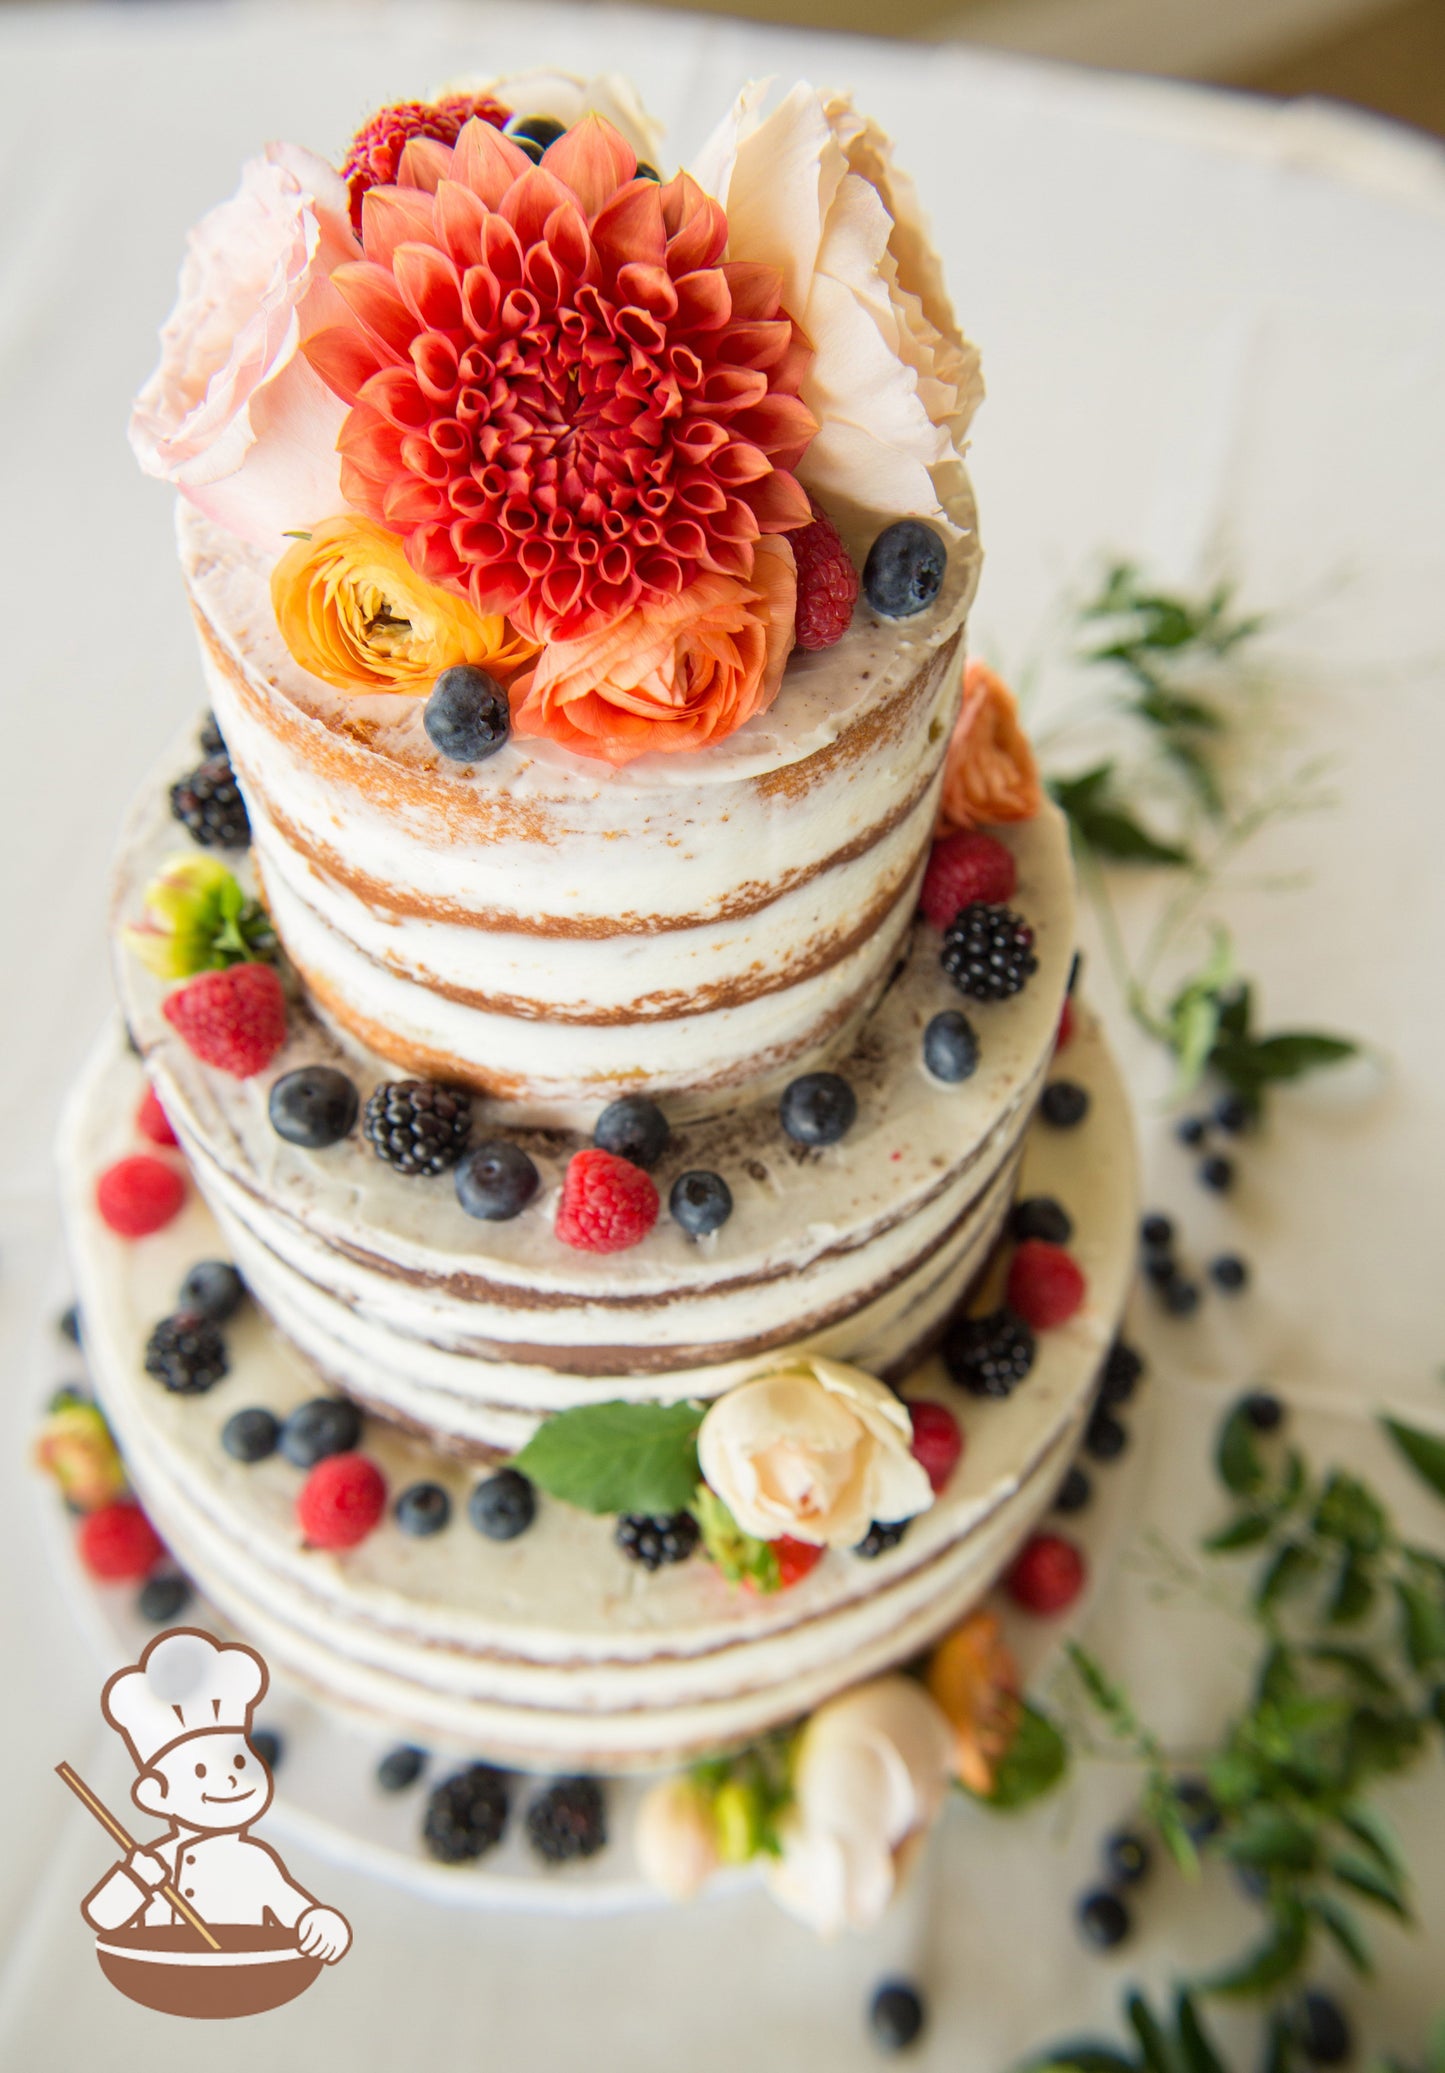 3-tier cake with white icing and decorated with a scraped texture to show some of the cake and fresh blackberries, blueberries and raspberries.